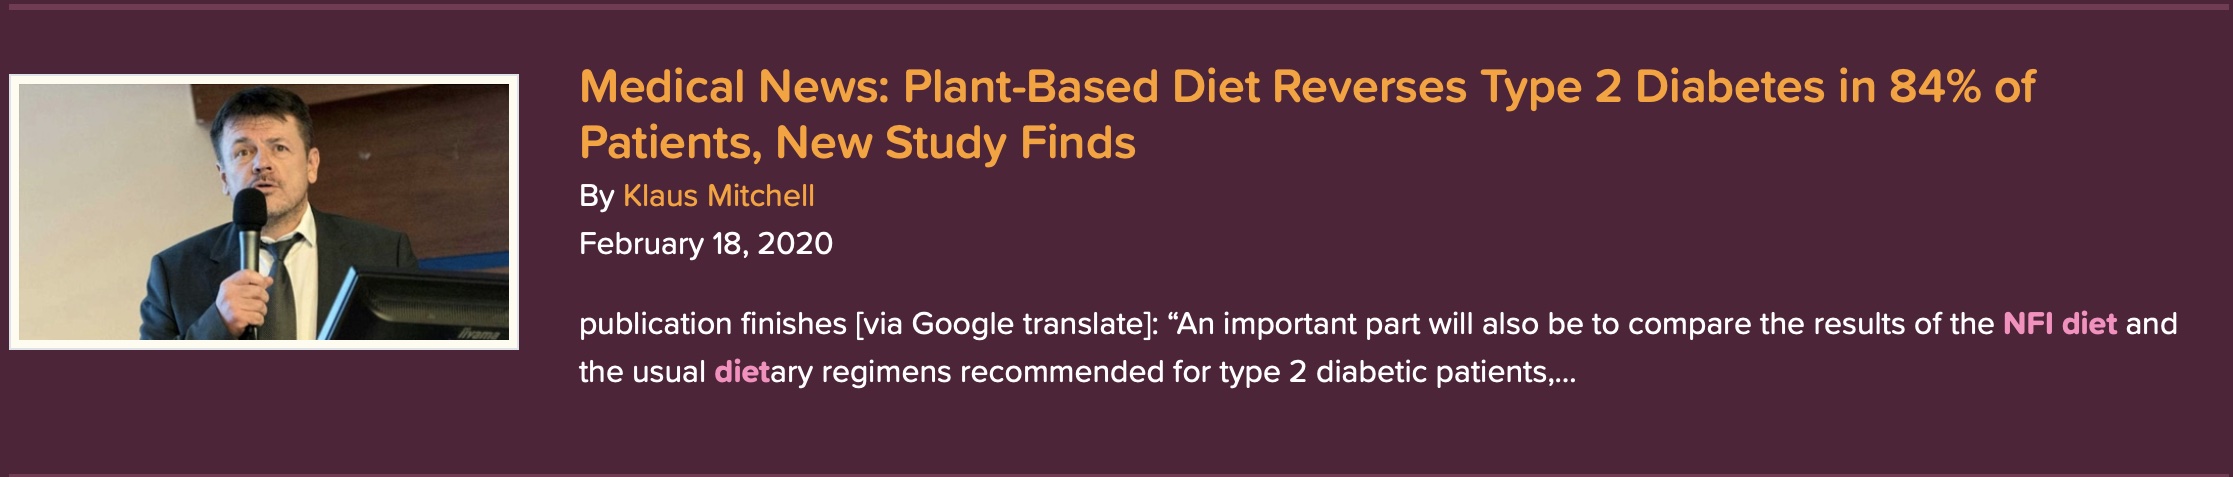 Medical News: Plant-Based Diet Reverses Type 2 Diabetes in 84% of Patients, New Study Finds